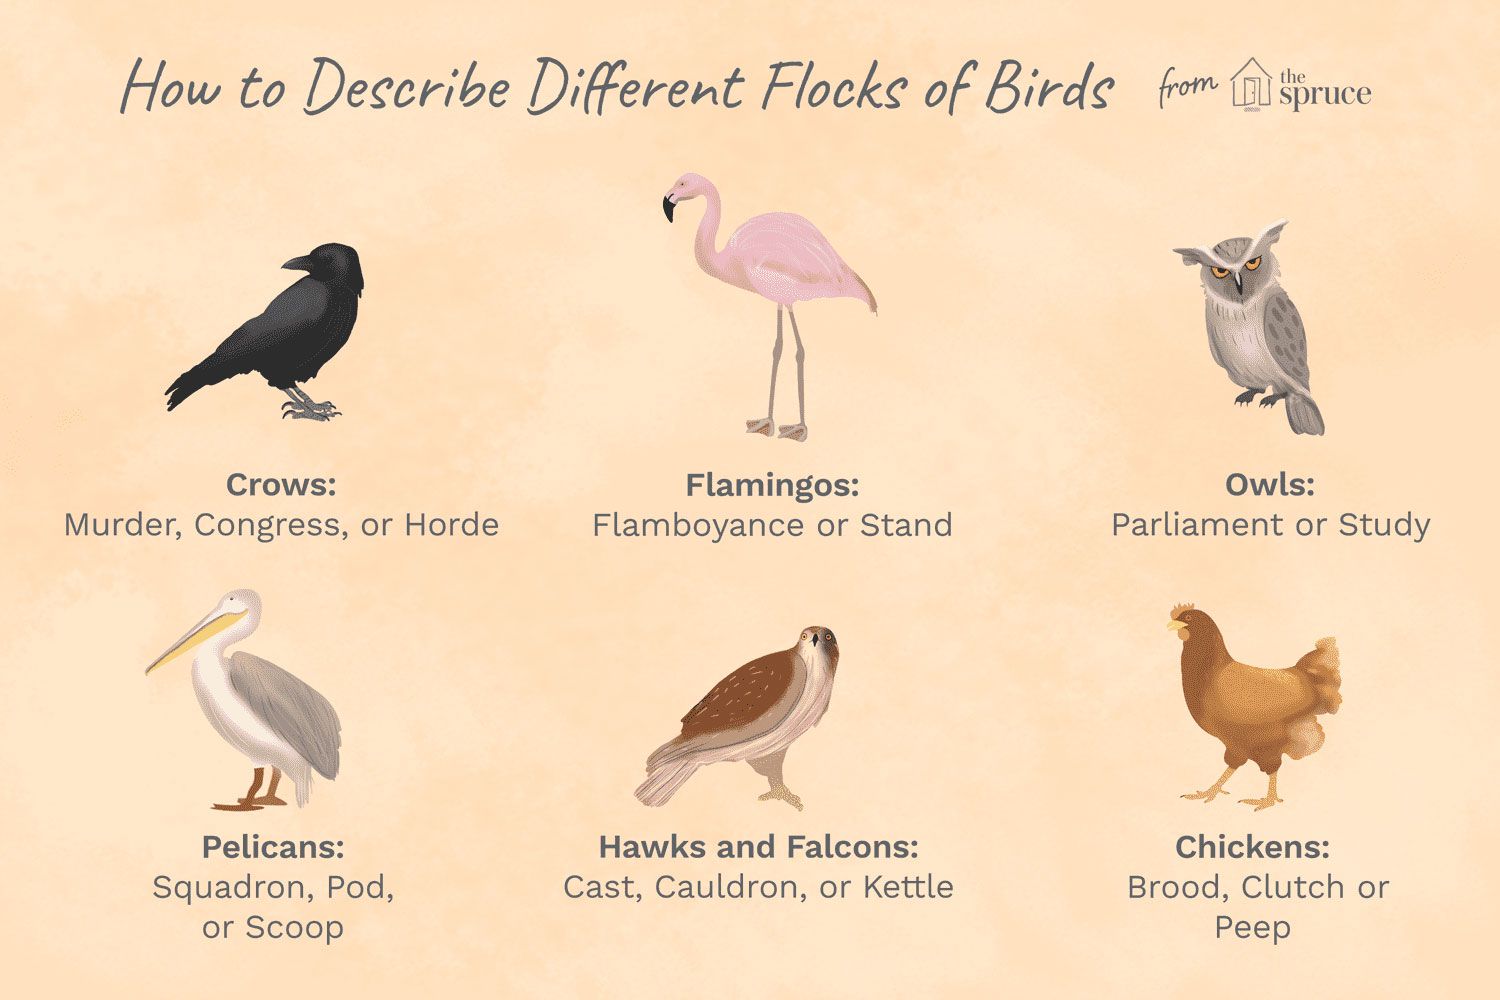 What is group of birds called?